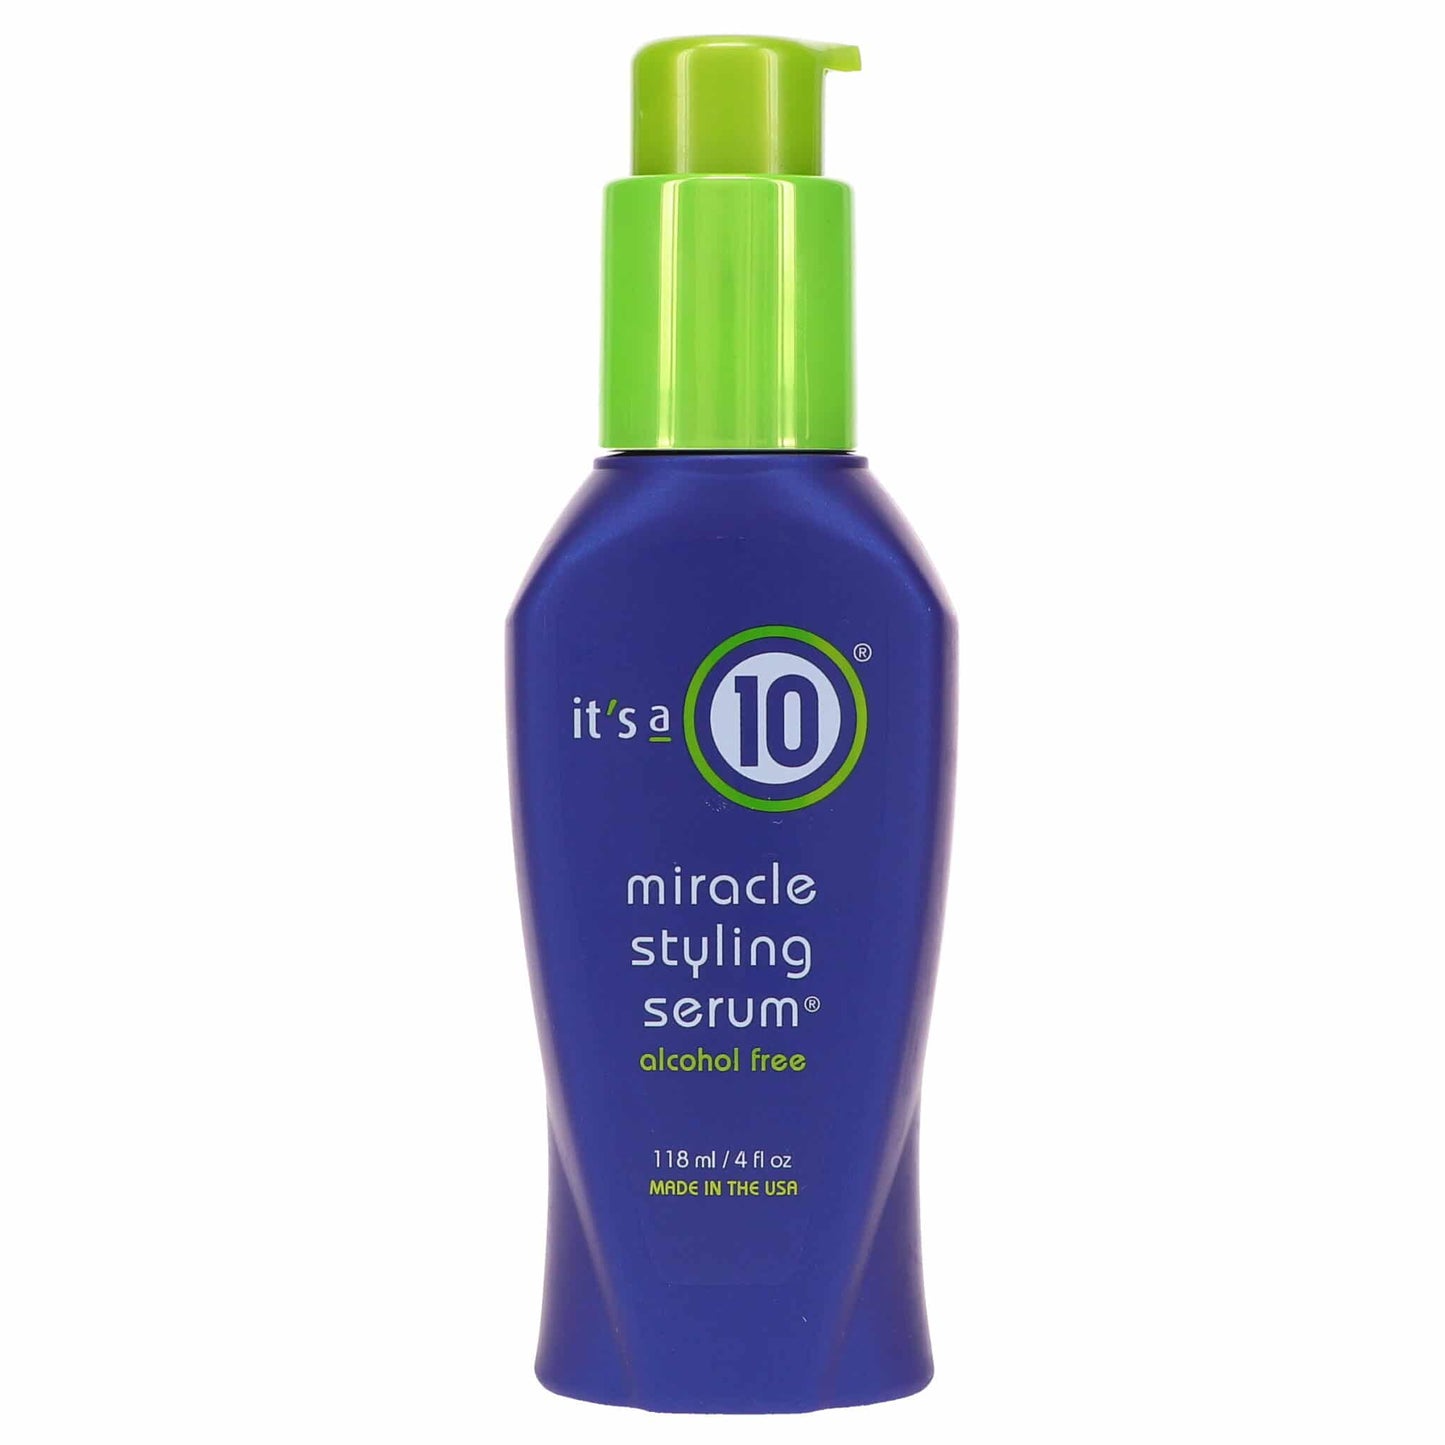 It's A 10 Miracle Styling Serum 4 Oz